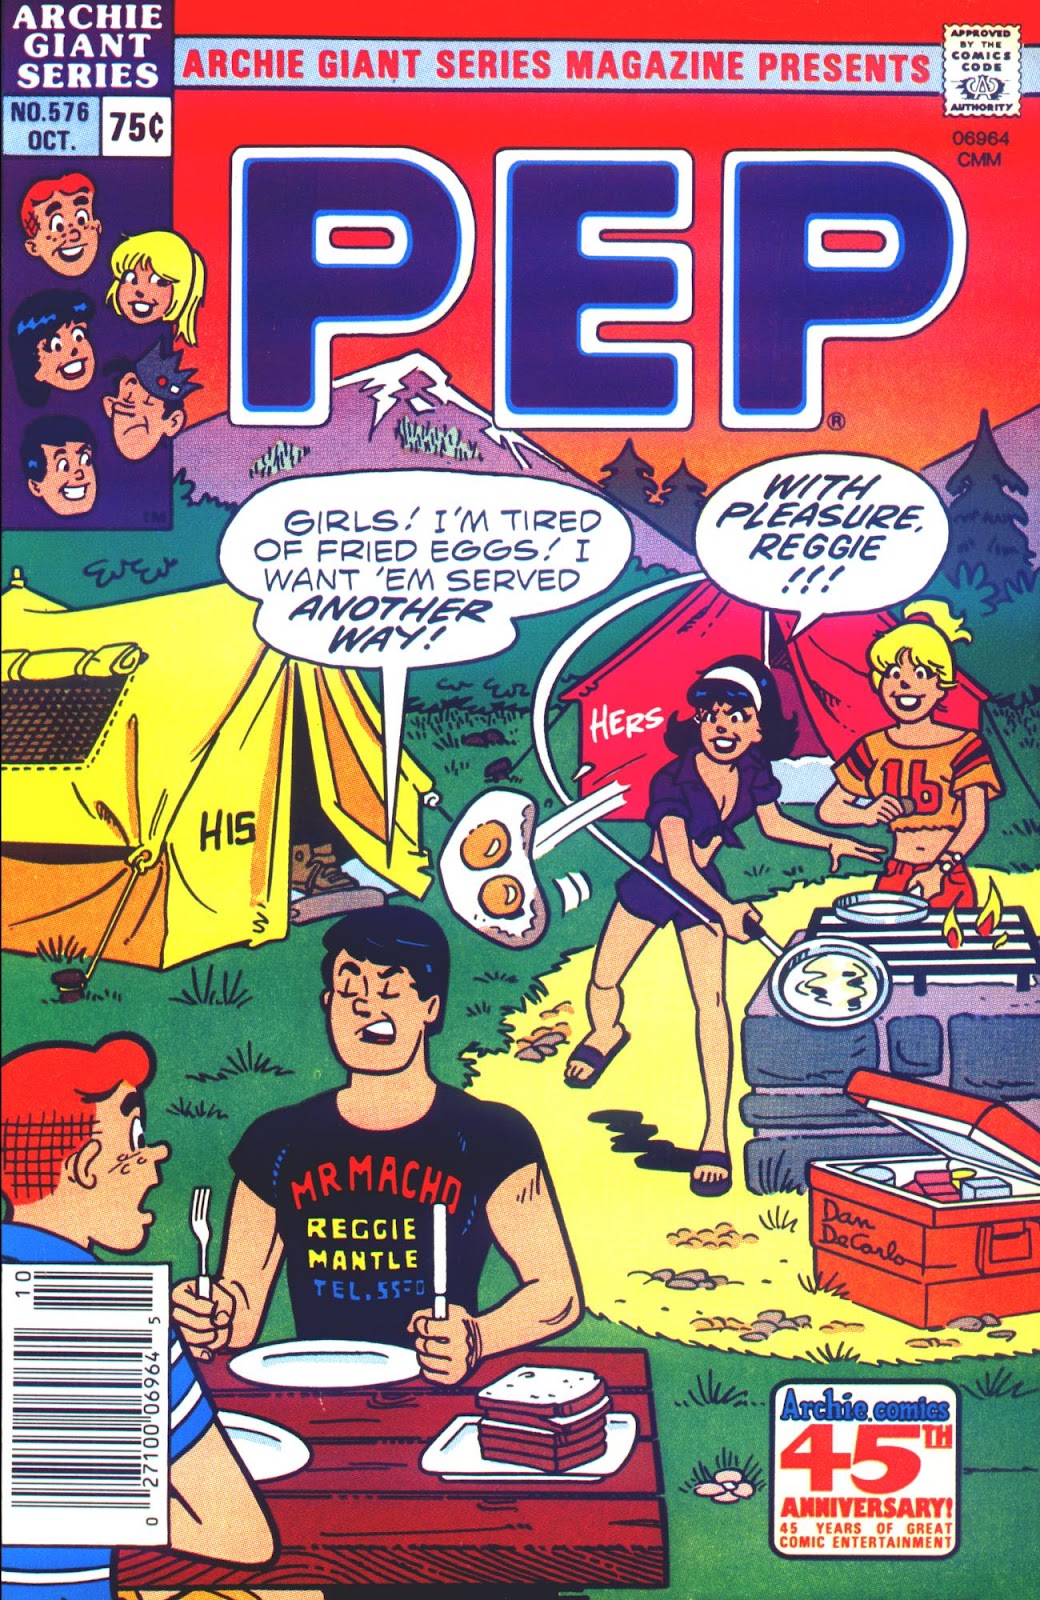 Archie Giant Series Magazine 576 Page 1